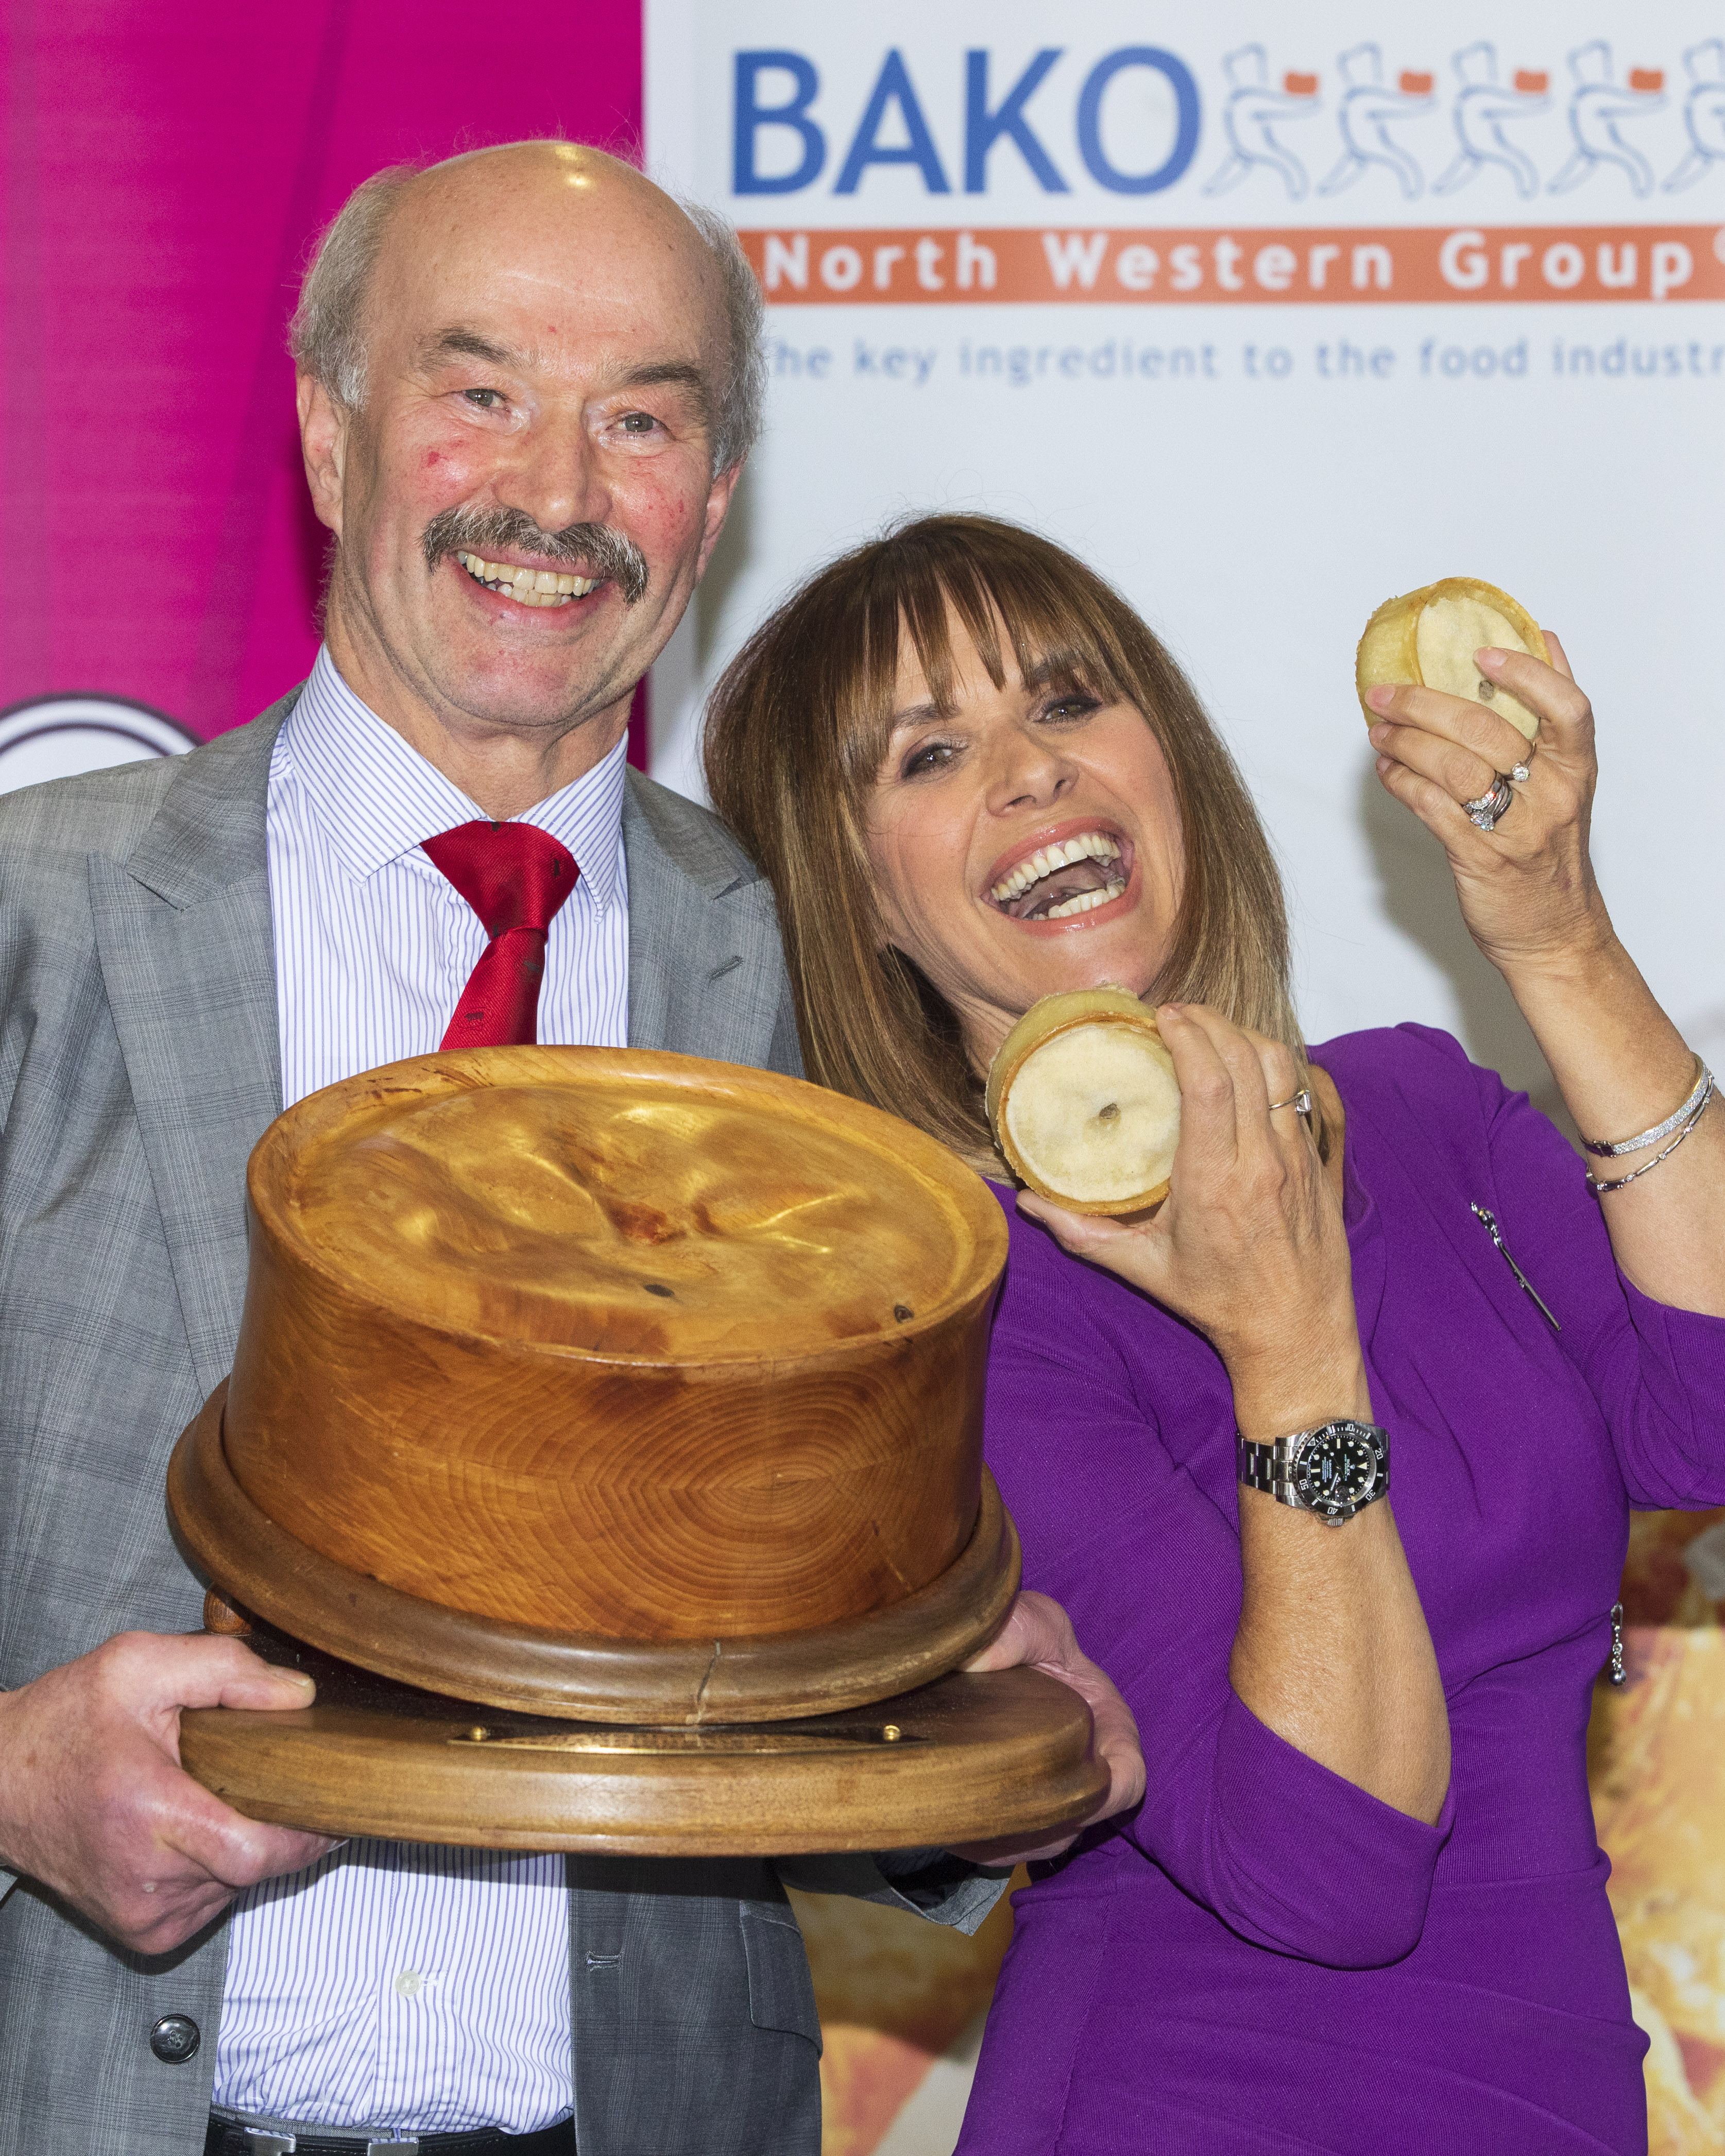 ***FREE TO USE***
Alan Pirie of James Pirie & Son, Blairgowrie Winner of the 21st World Championship Scotch Pie Awards 2020 hosted by Carol Smillie. Jan 14 2020